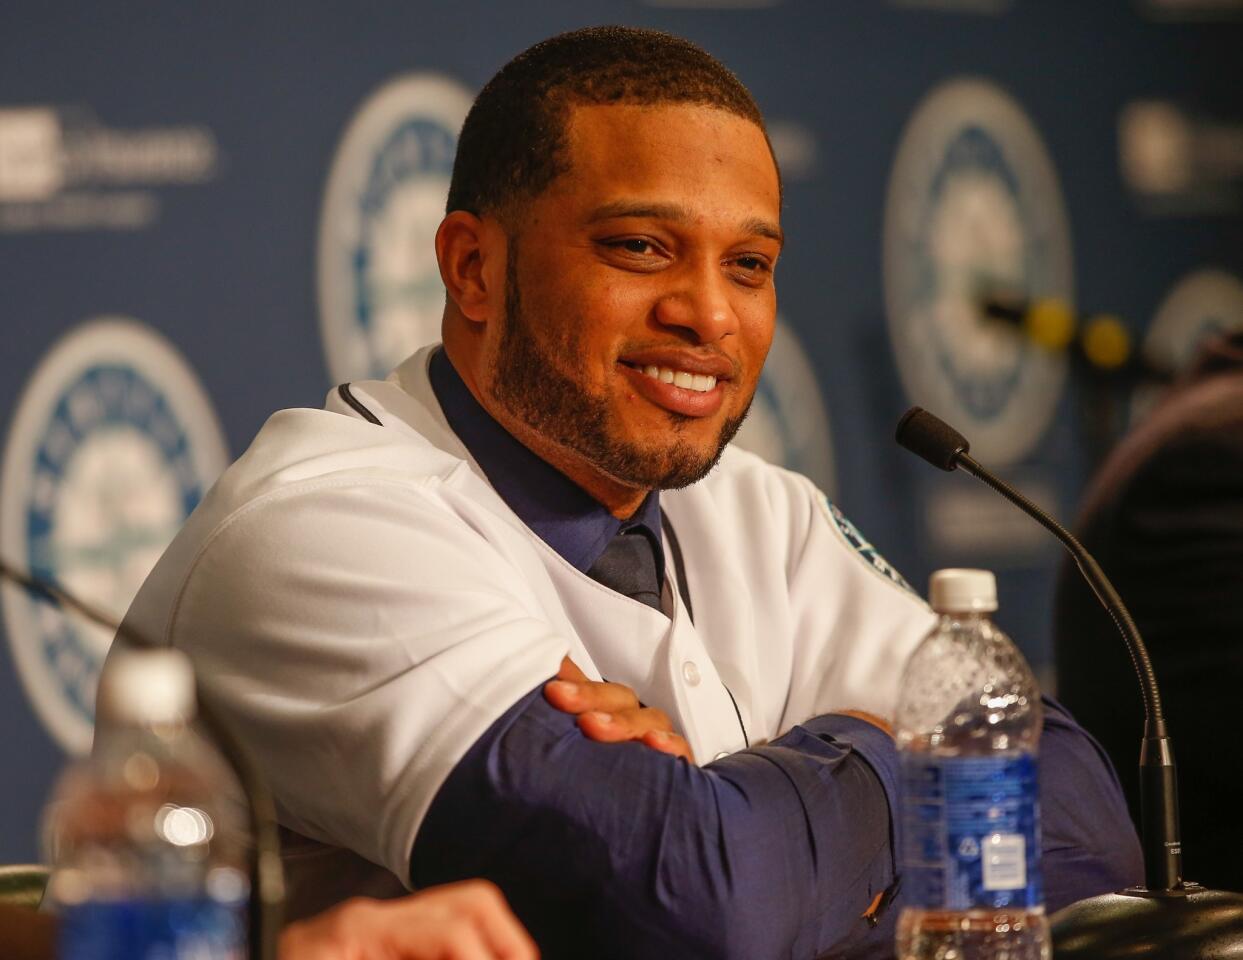 Cano was not the most popular player on his old team, and his new team signed him to sell tickets, prop up the television ratings and lead a baseball revival in Seattle. He'll probably go 0 for 3, and he'll wear the "$240 million man" label for the rest of his career.